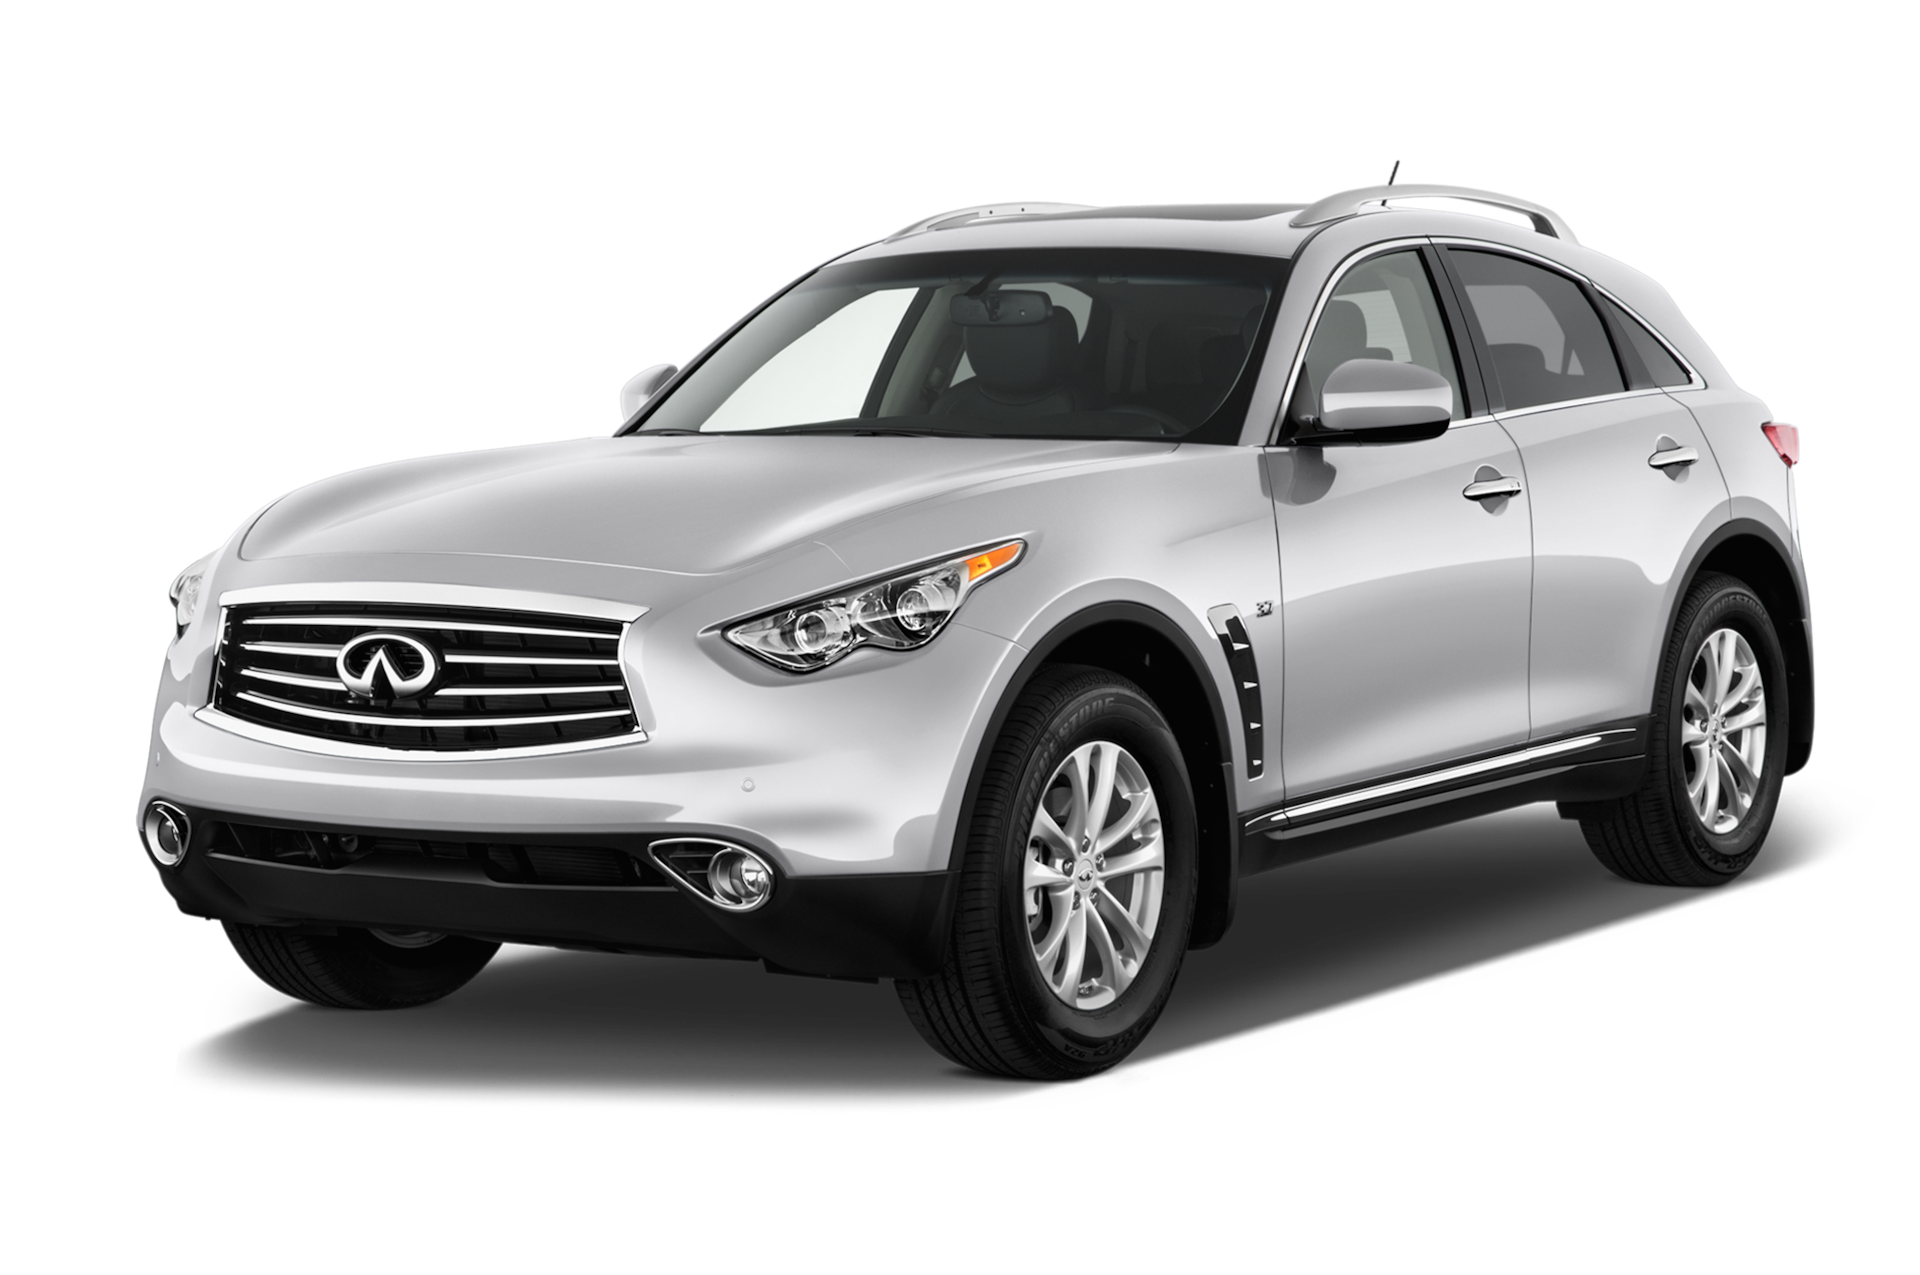 2014 Infiniti QX70 Prices, Reviews, and Photos - MotorTrend